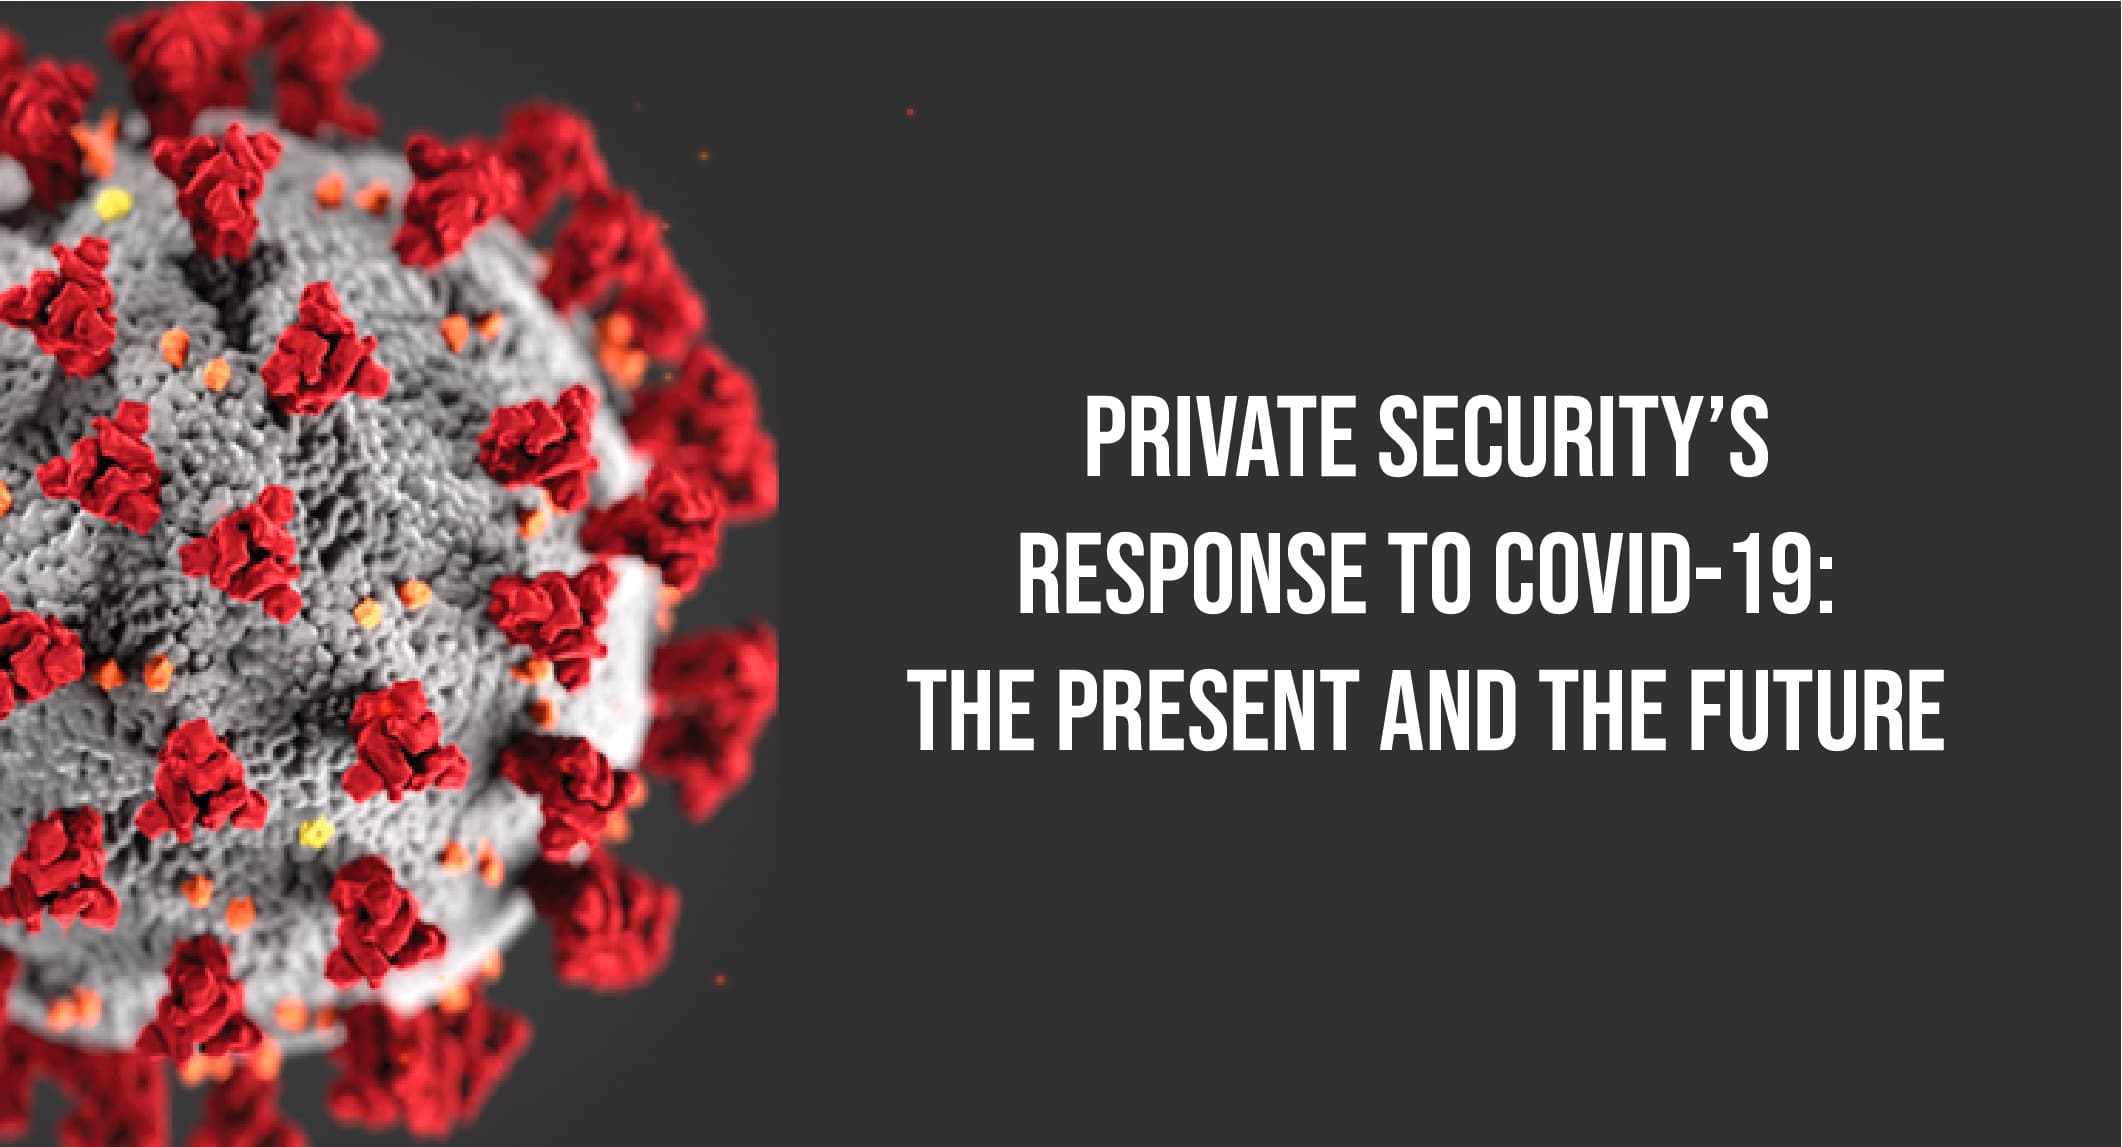 Private Security's response to COVID-19: The present and the future